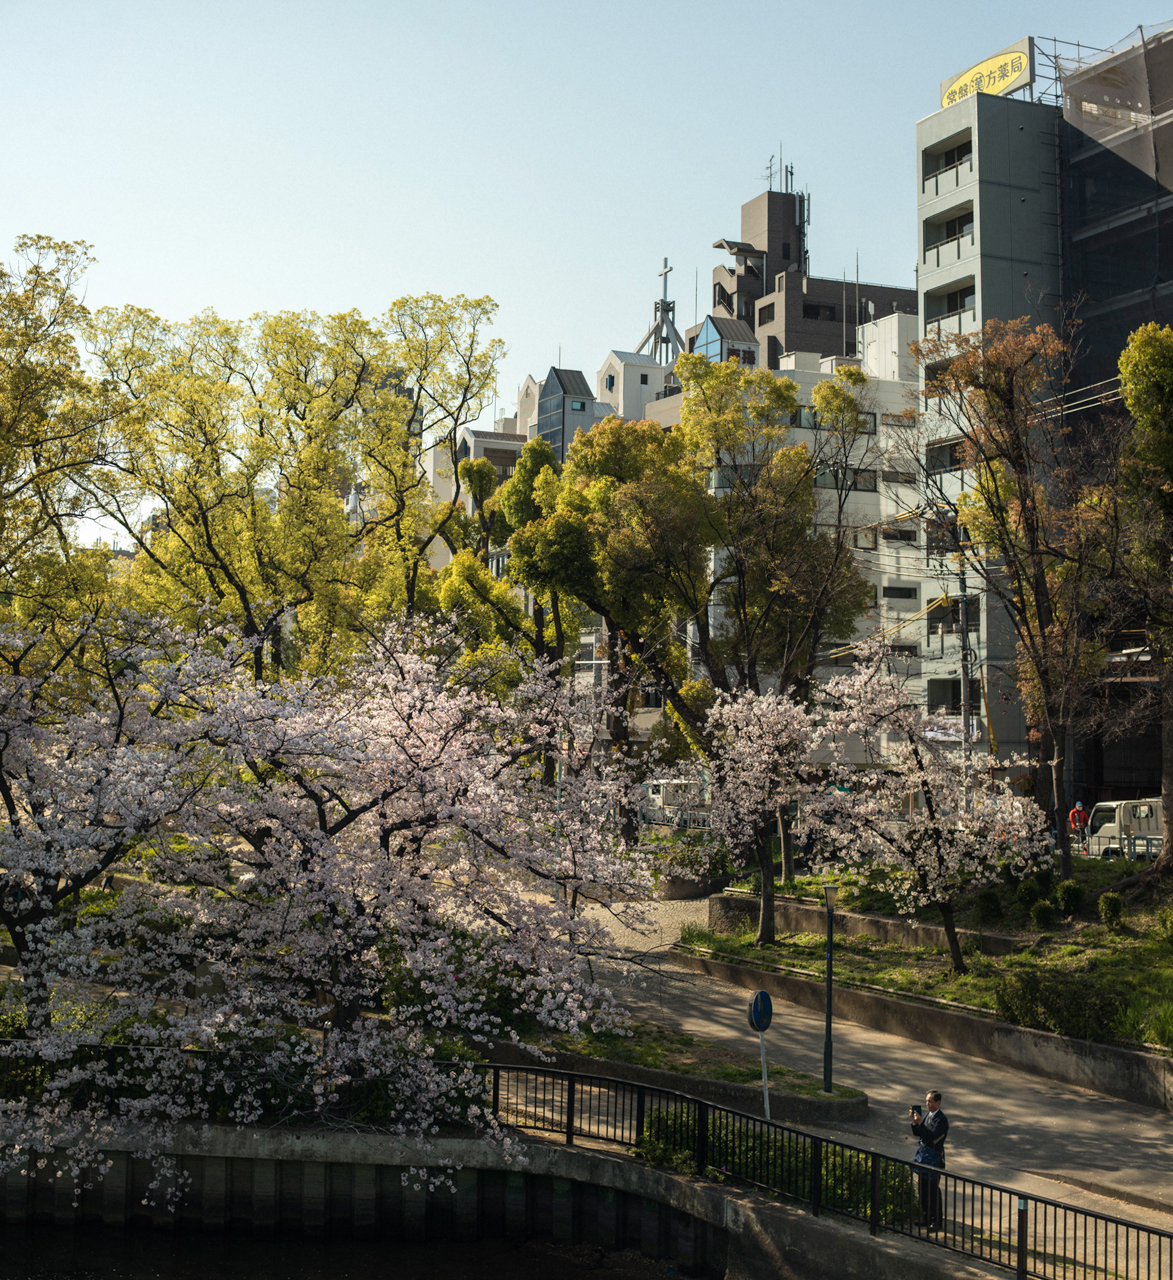 Cherry blossoms in a park with pathways and buildings on the edge of it